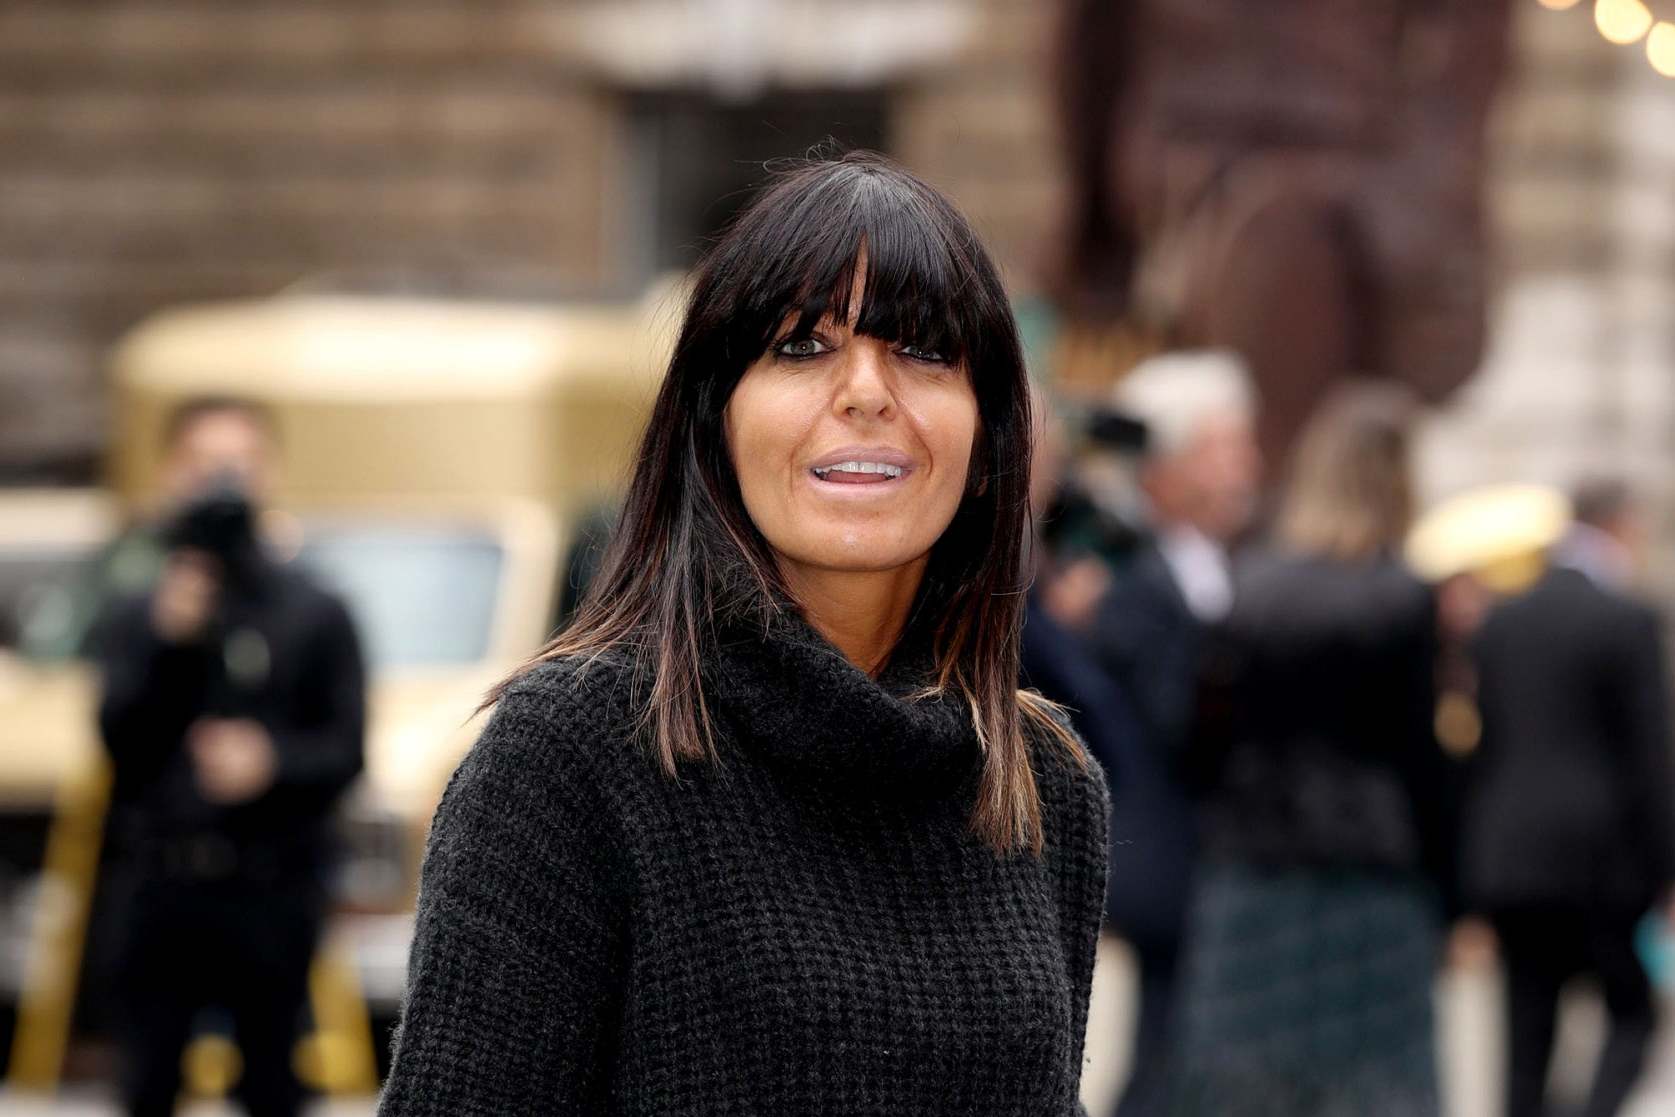 Claudia Winkleman is in the top 10 of the BBC’s highest earners